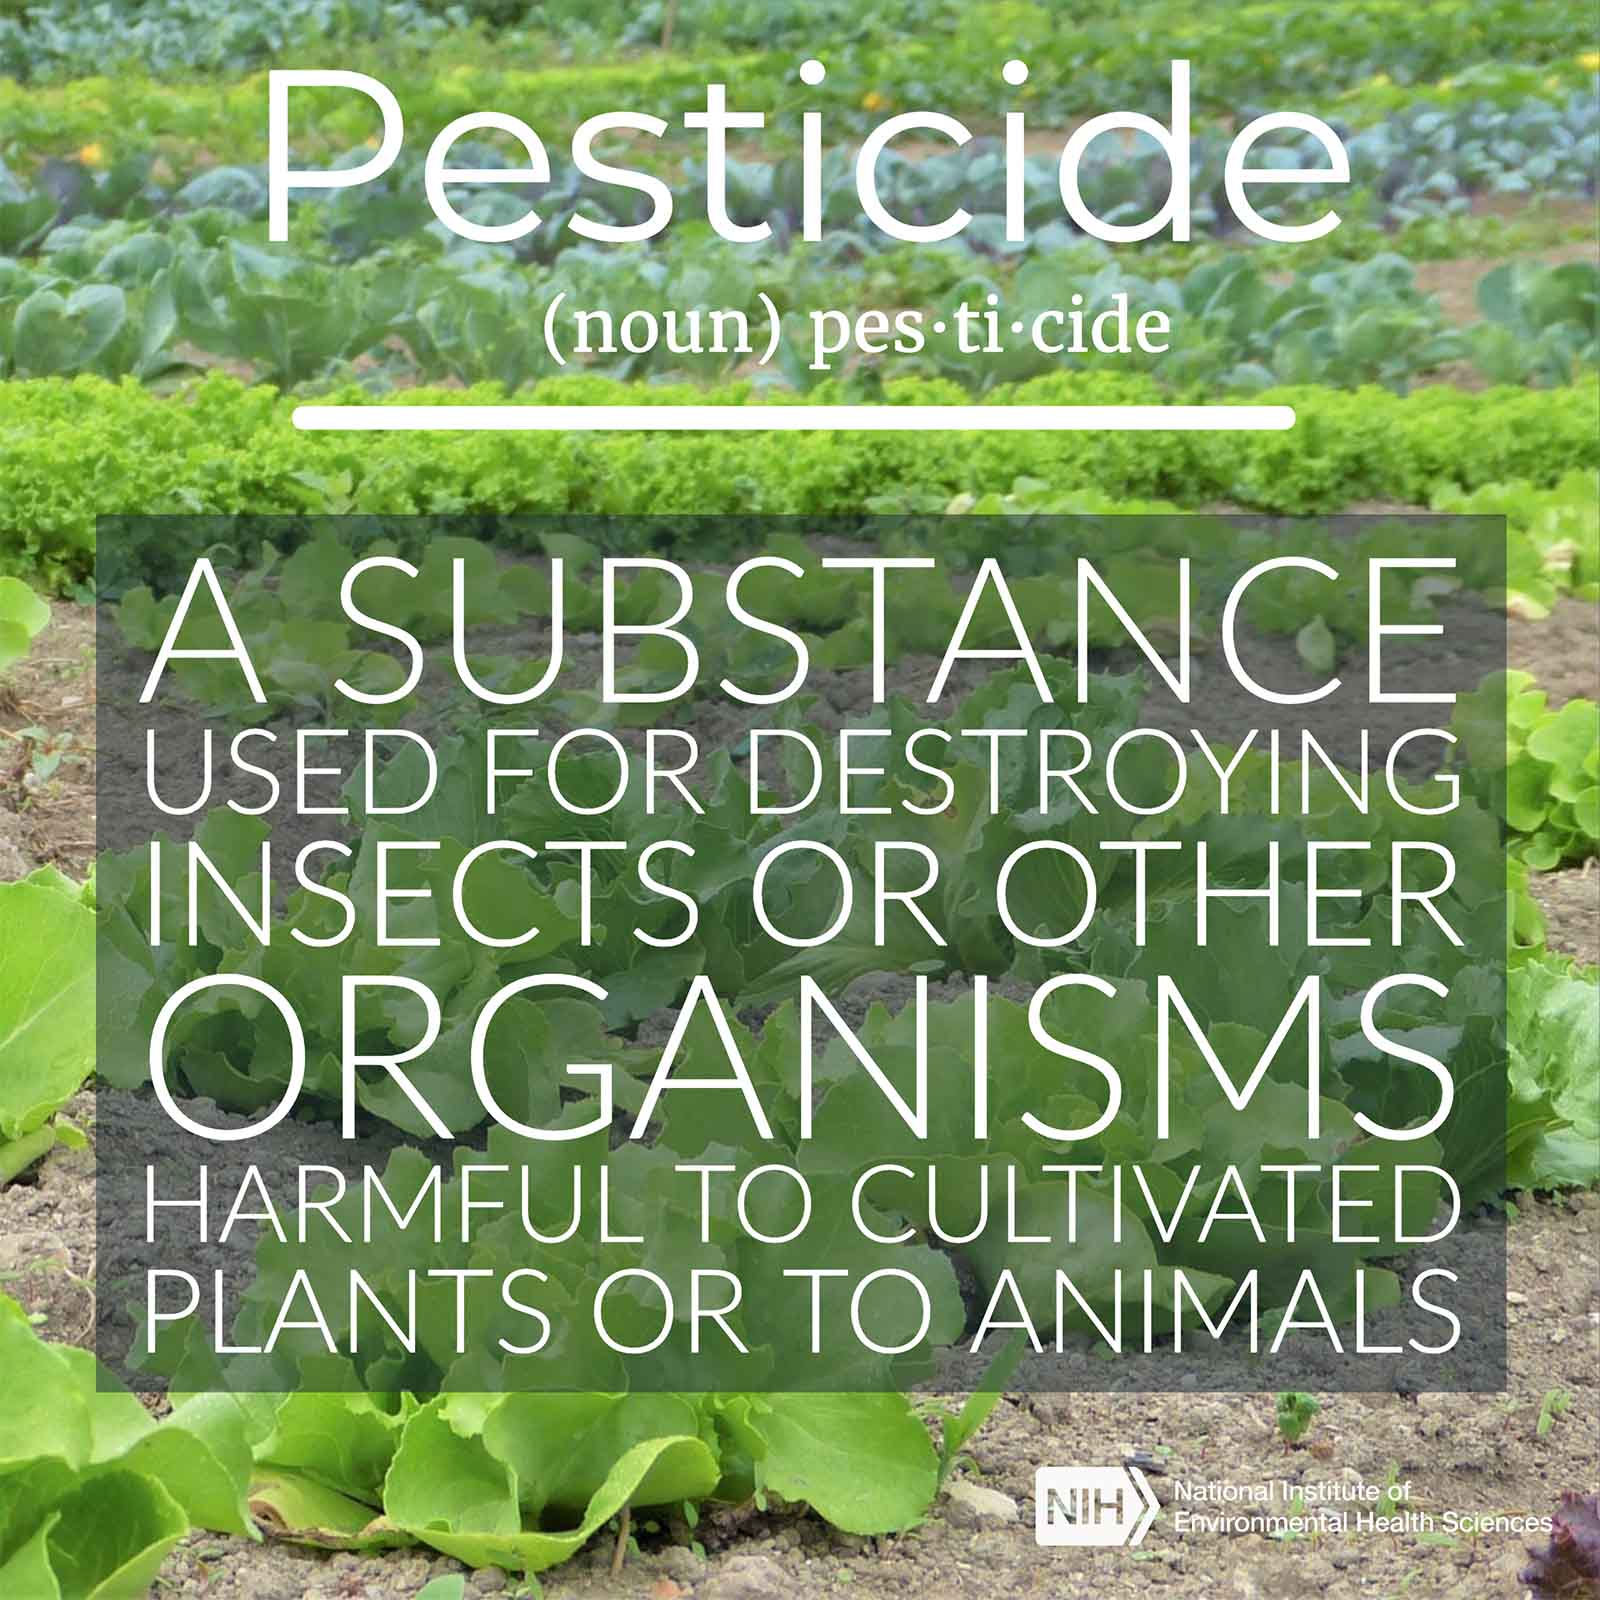 Pesticide (noun) defined as a substance used for destroying insects or other organisms harmful to cultivated plants or to animals